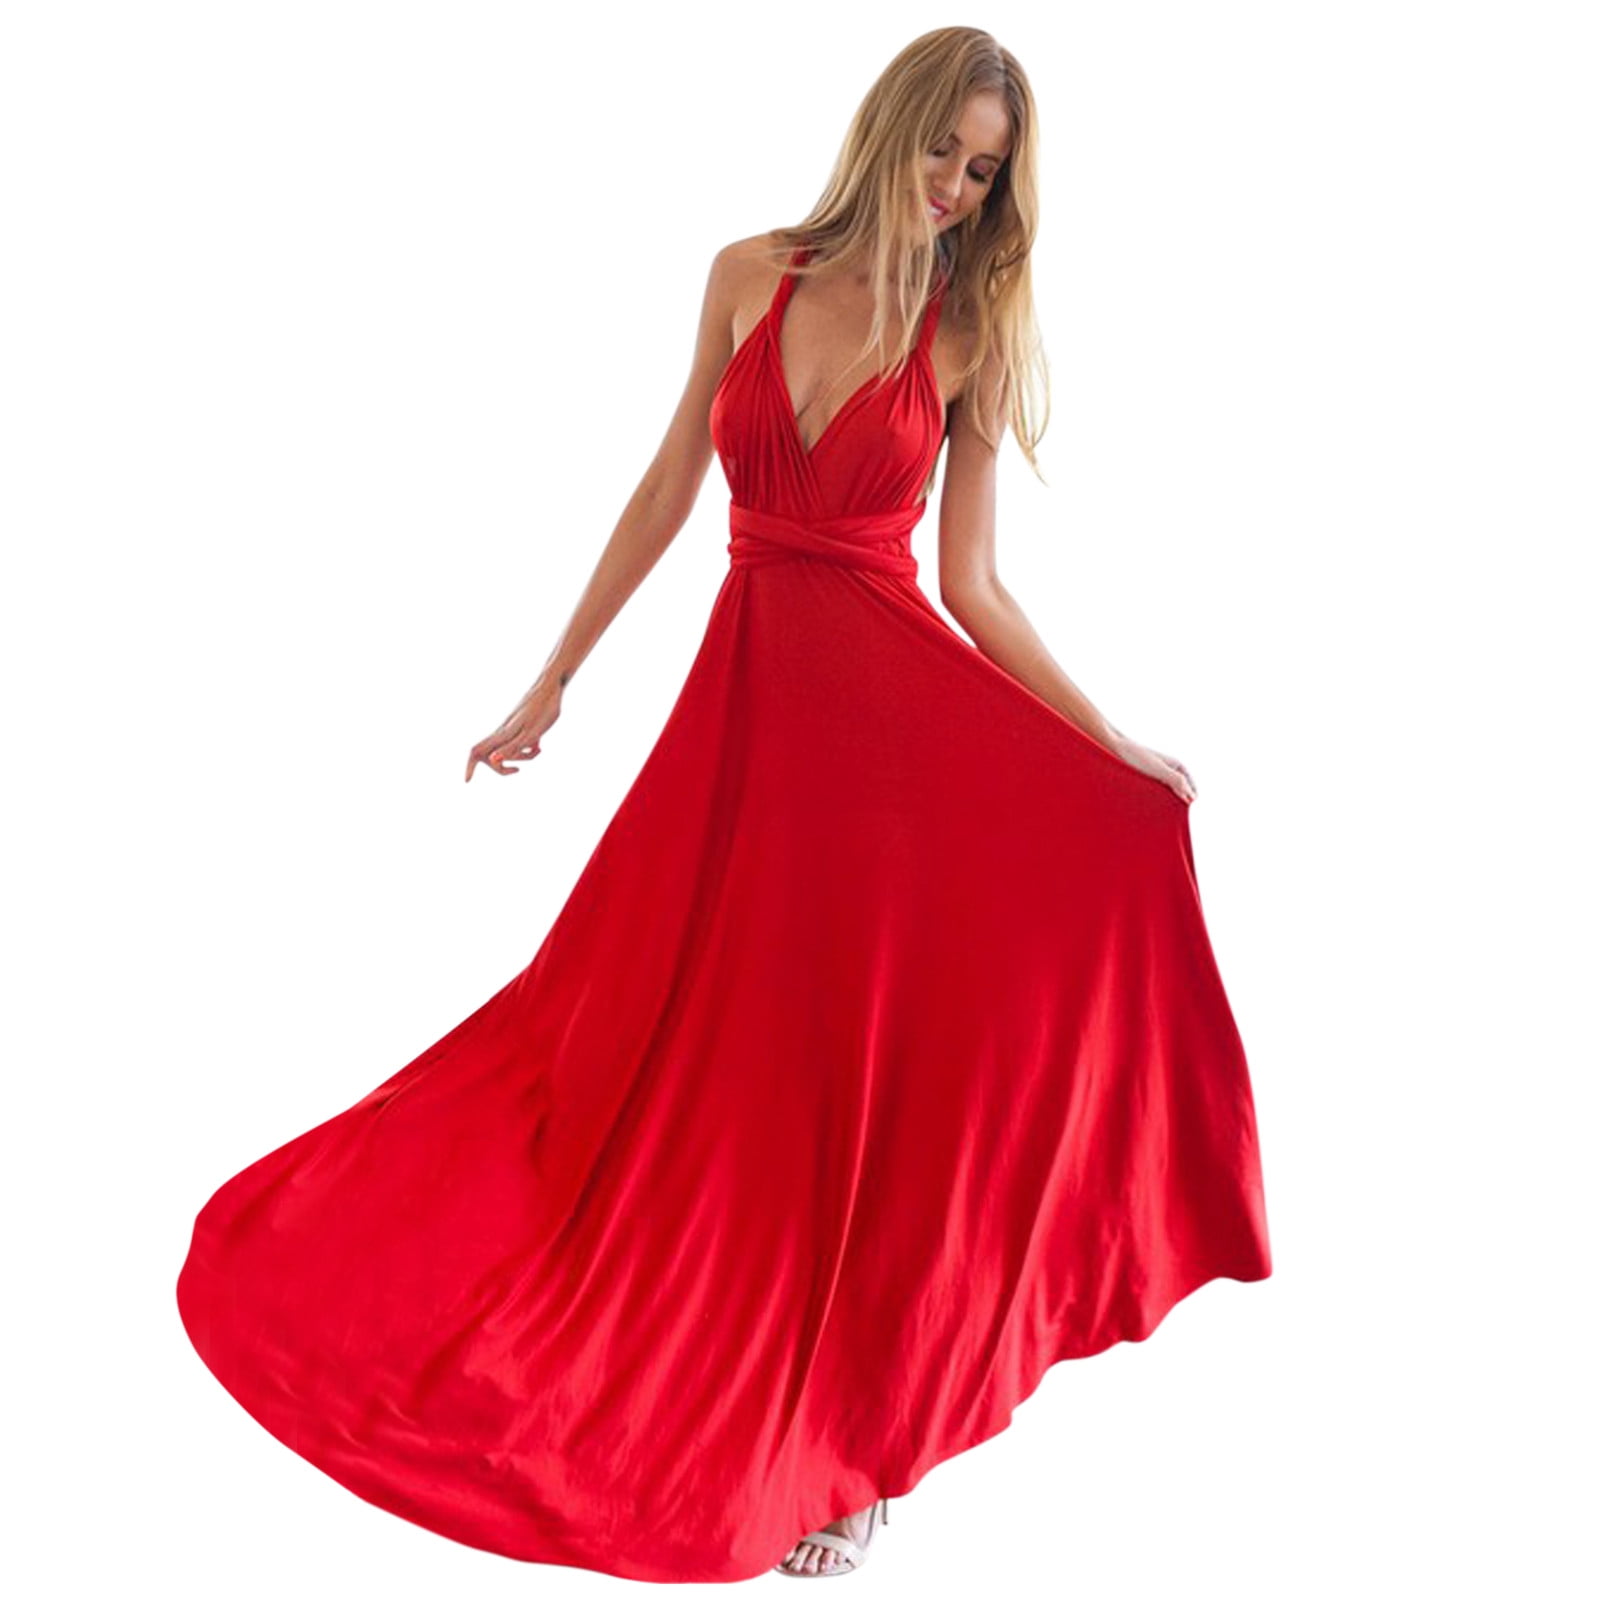 Two Young Beautiful Girls Wearing Off-the-shoulder Full-length Sky Blue and  Crimson Red Satin Slit Prom Ball Gowns Stock Photo - Image of hemline,  blue: 208350640